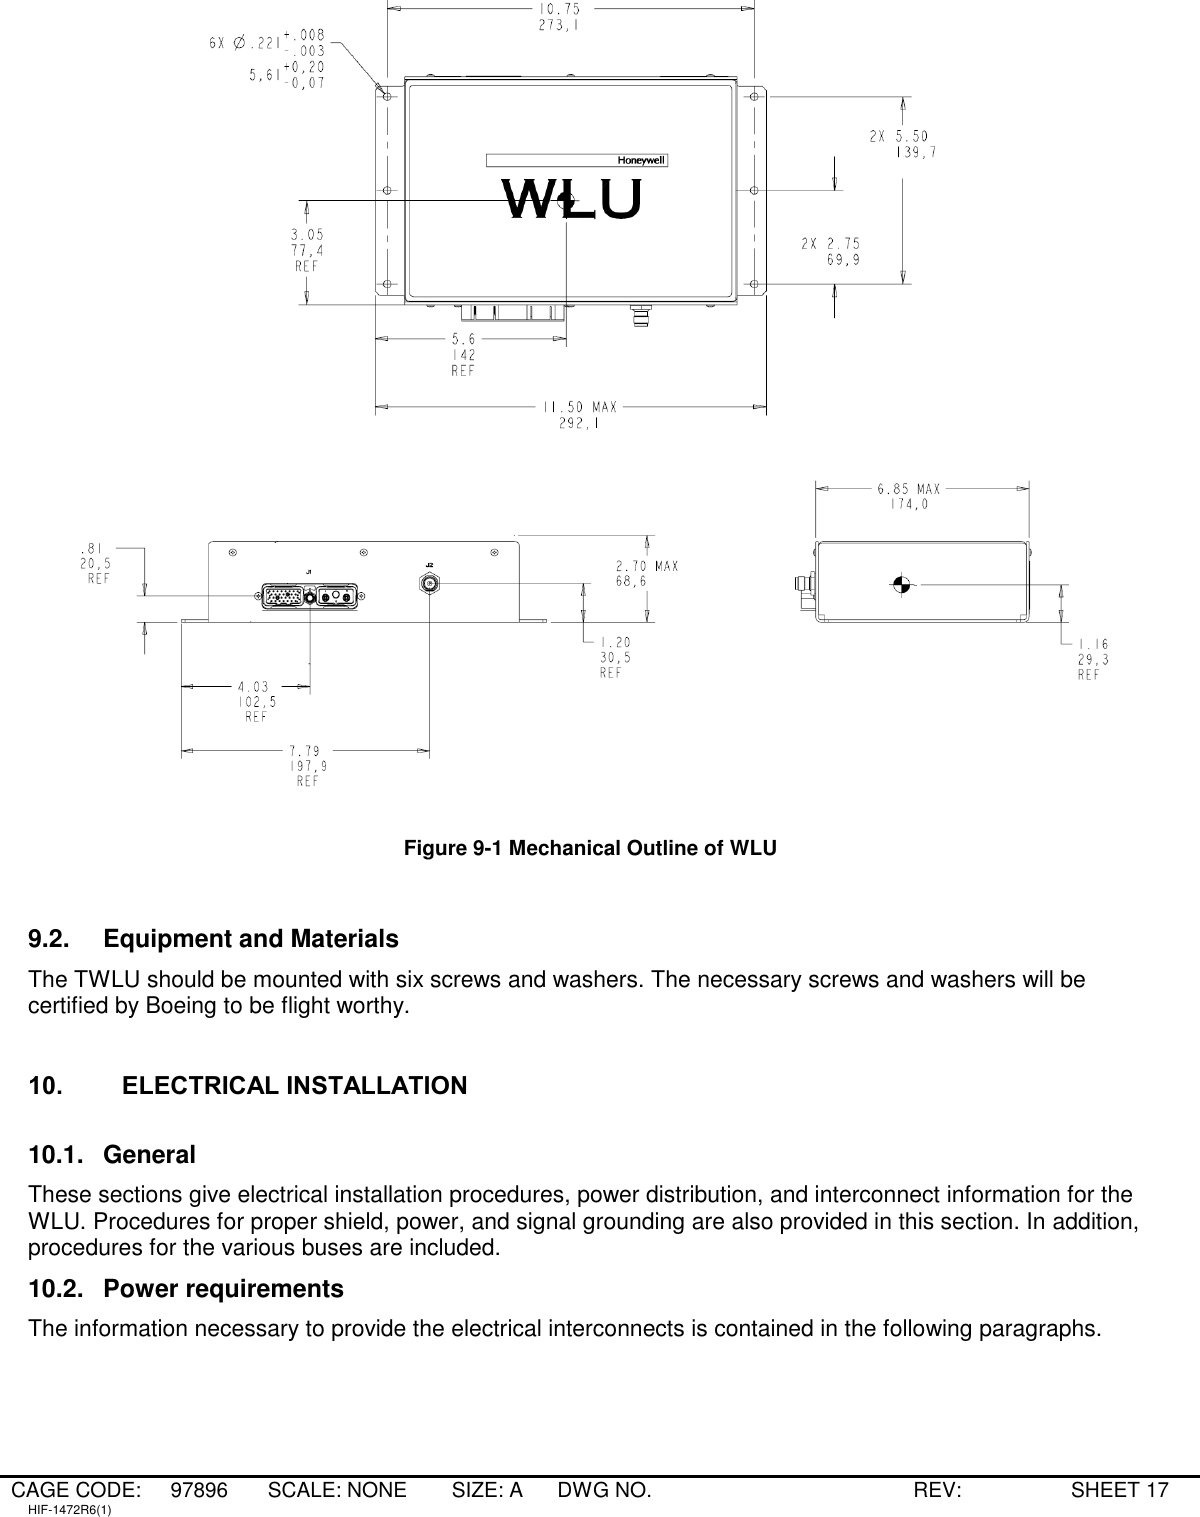 CAGE CODE: 97896 SCALE: NONE   SIZE: A DWG NO.   REV:   SHEET 17 HIF-1472R6(1)     Figure 9-1 Mechanical Outline of WLU  9.2.  Equipment and Materials The TWLU should be mounted with six screws and washers. The necessary screws and washers will be certified by Boeing to be flight worthy.   10. ELECTRICAL INSTALLATION  10.1.  General These sections give electrical installation procedures, power distribution, and interconnect information for the WLU. Procedures for proper shield, power, and signal grounding are also provided in this section. In addition, procedures for the various buses are included. 10.2.  Power requirements The information necessary to provide the electrical interconnects is contained in the following paragraphs.  